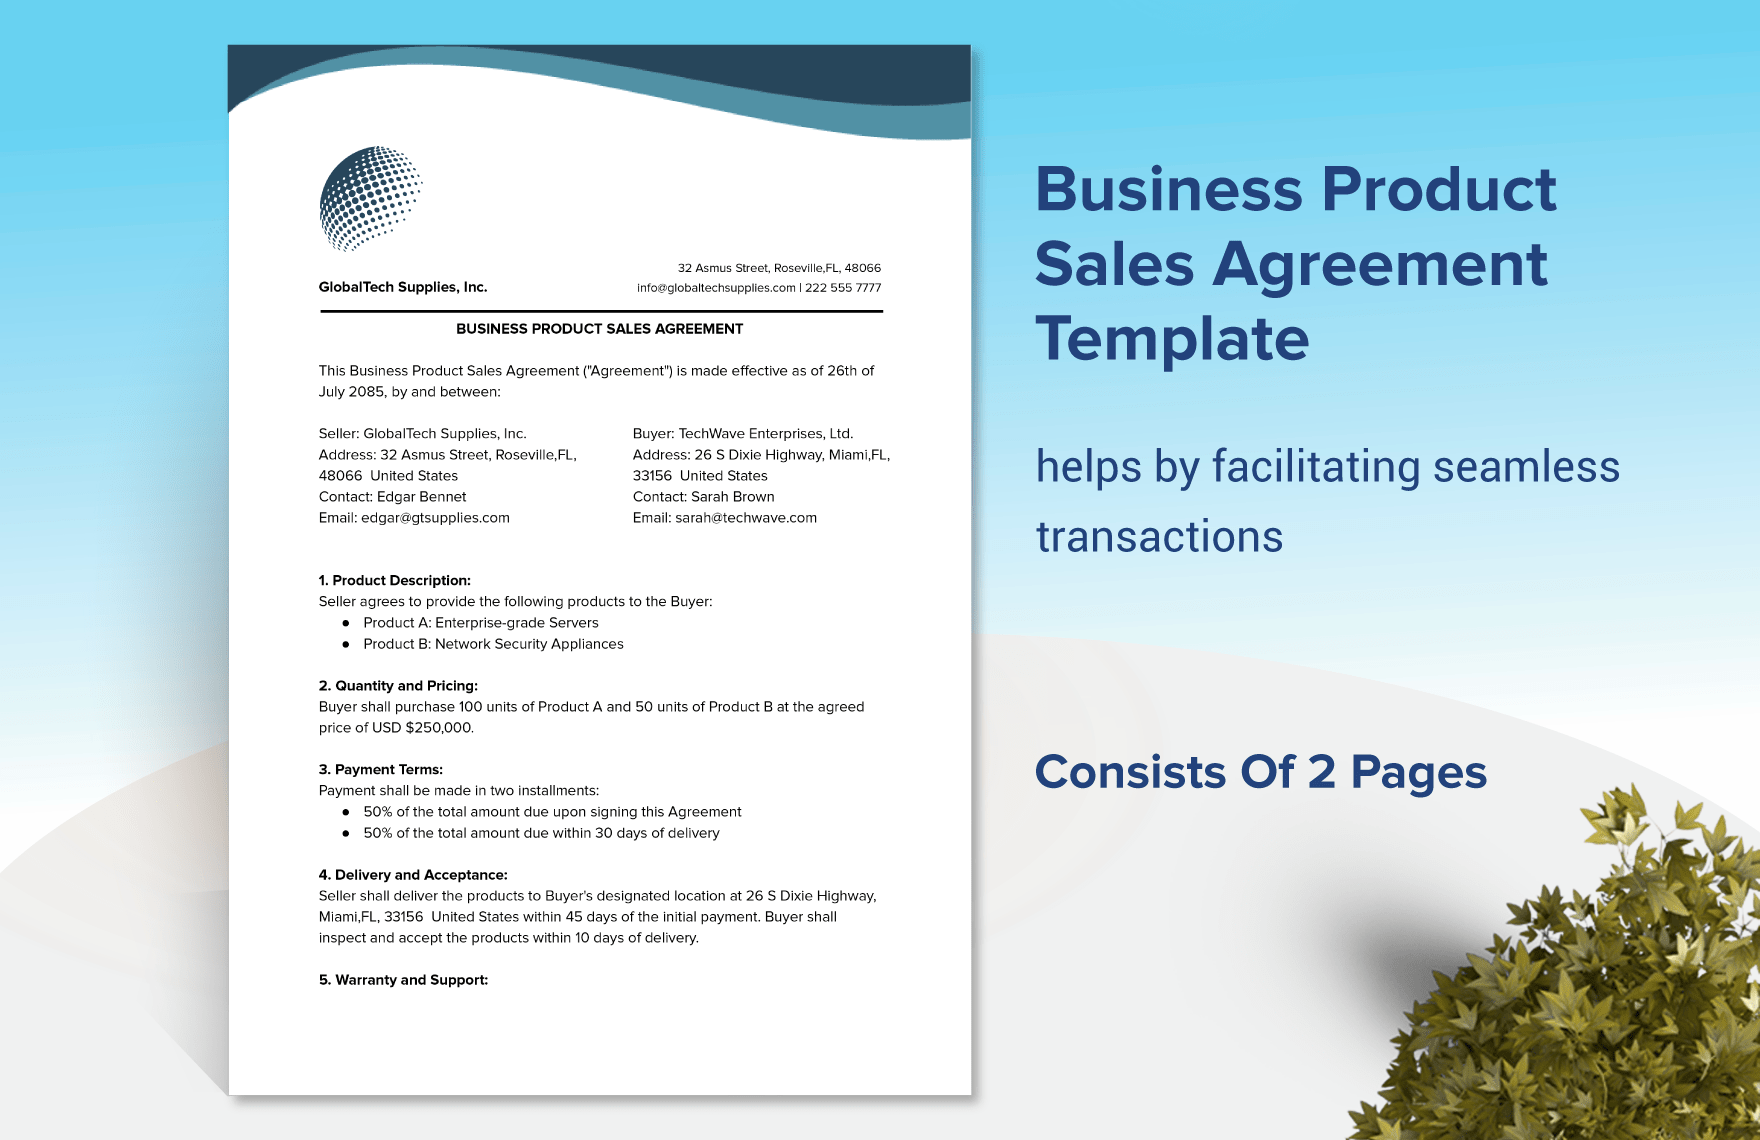 Business Product Sales Agreement Template